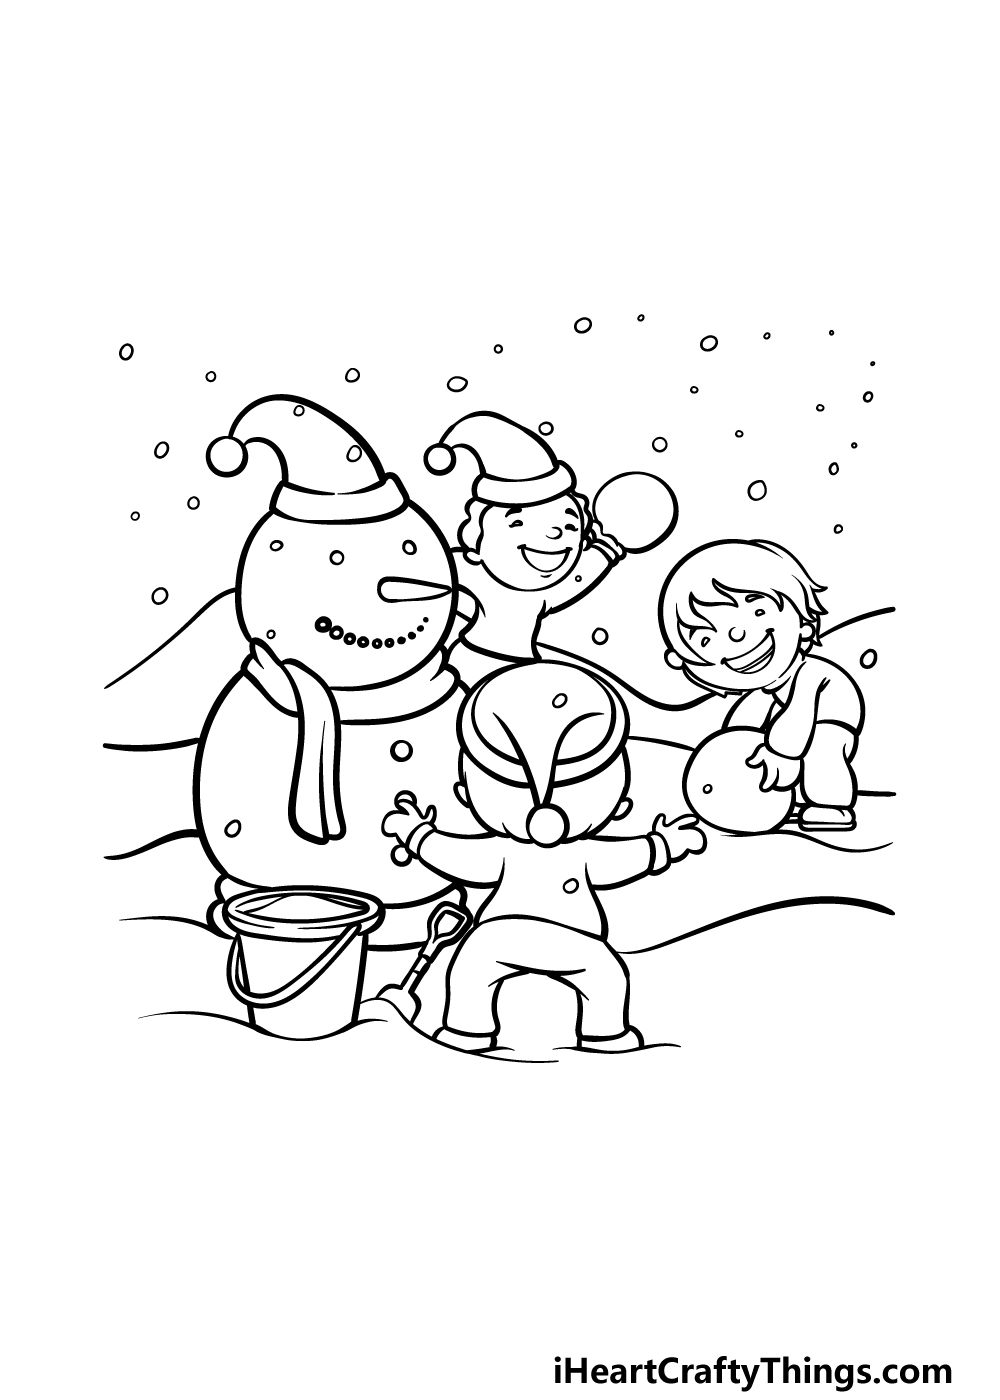 how to draw a Holiday step 5